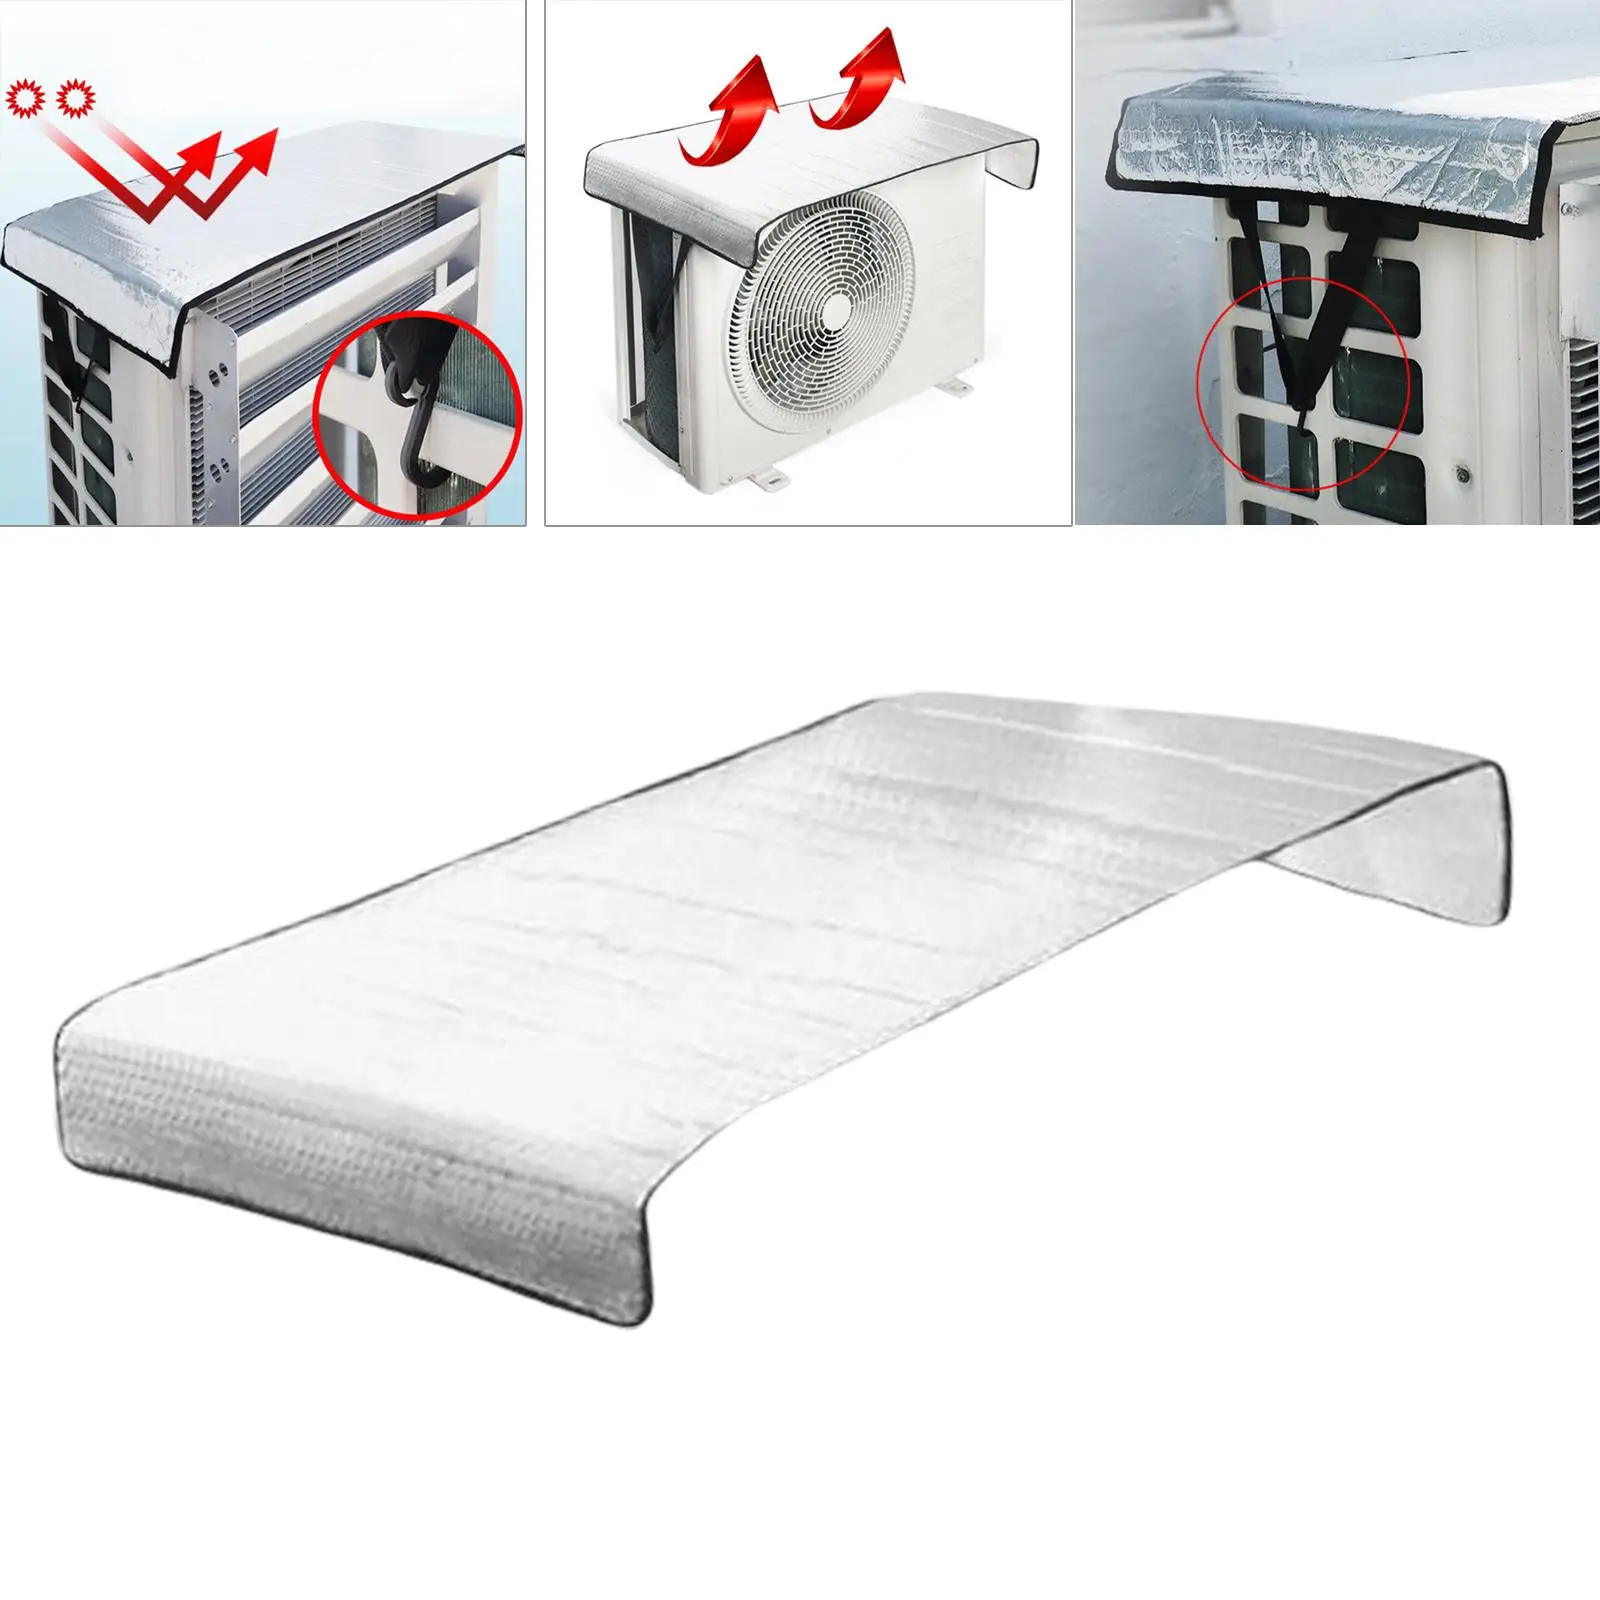 Aluminum Foil Outdoor Air Conditioner Cover Anti Dust Water Resistant Durable Windproof Large AC Cover for Outdoor Protection